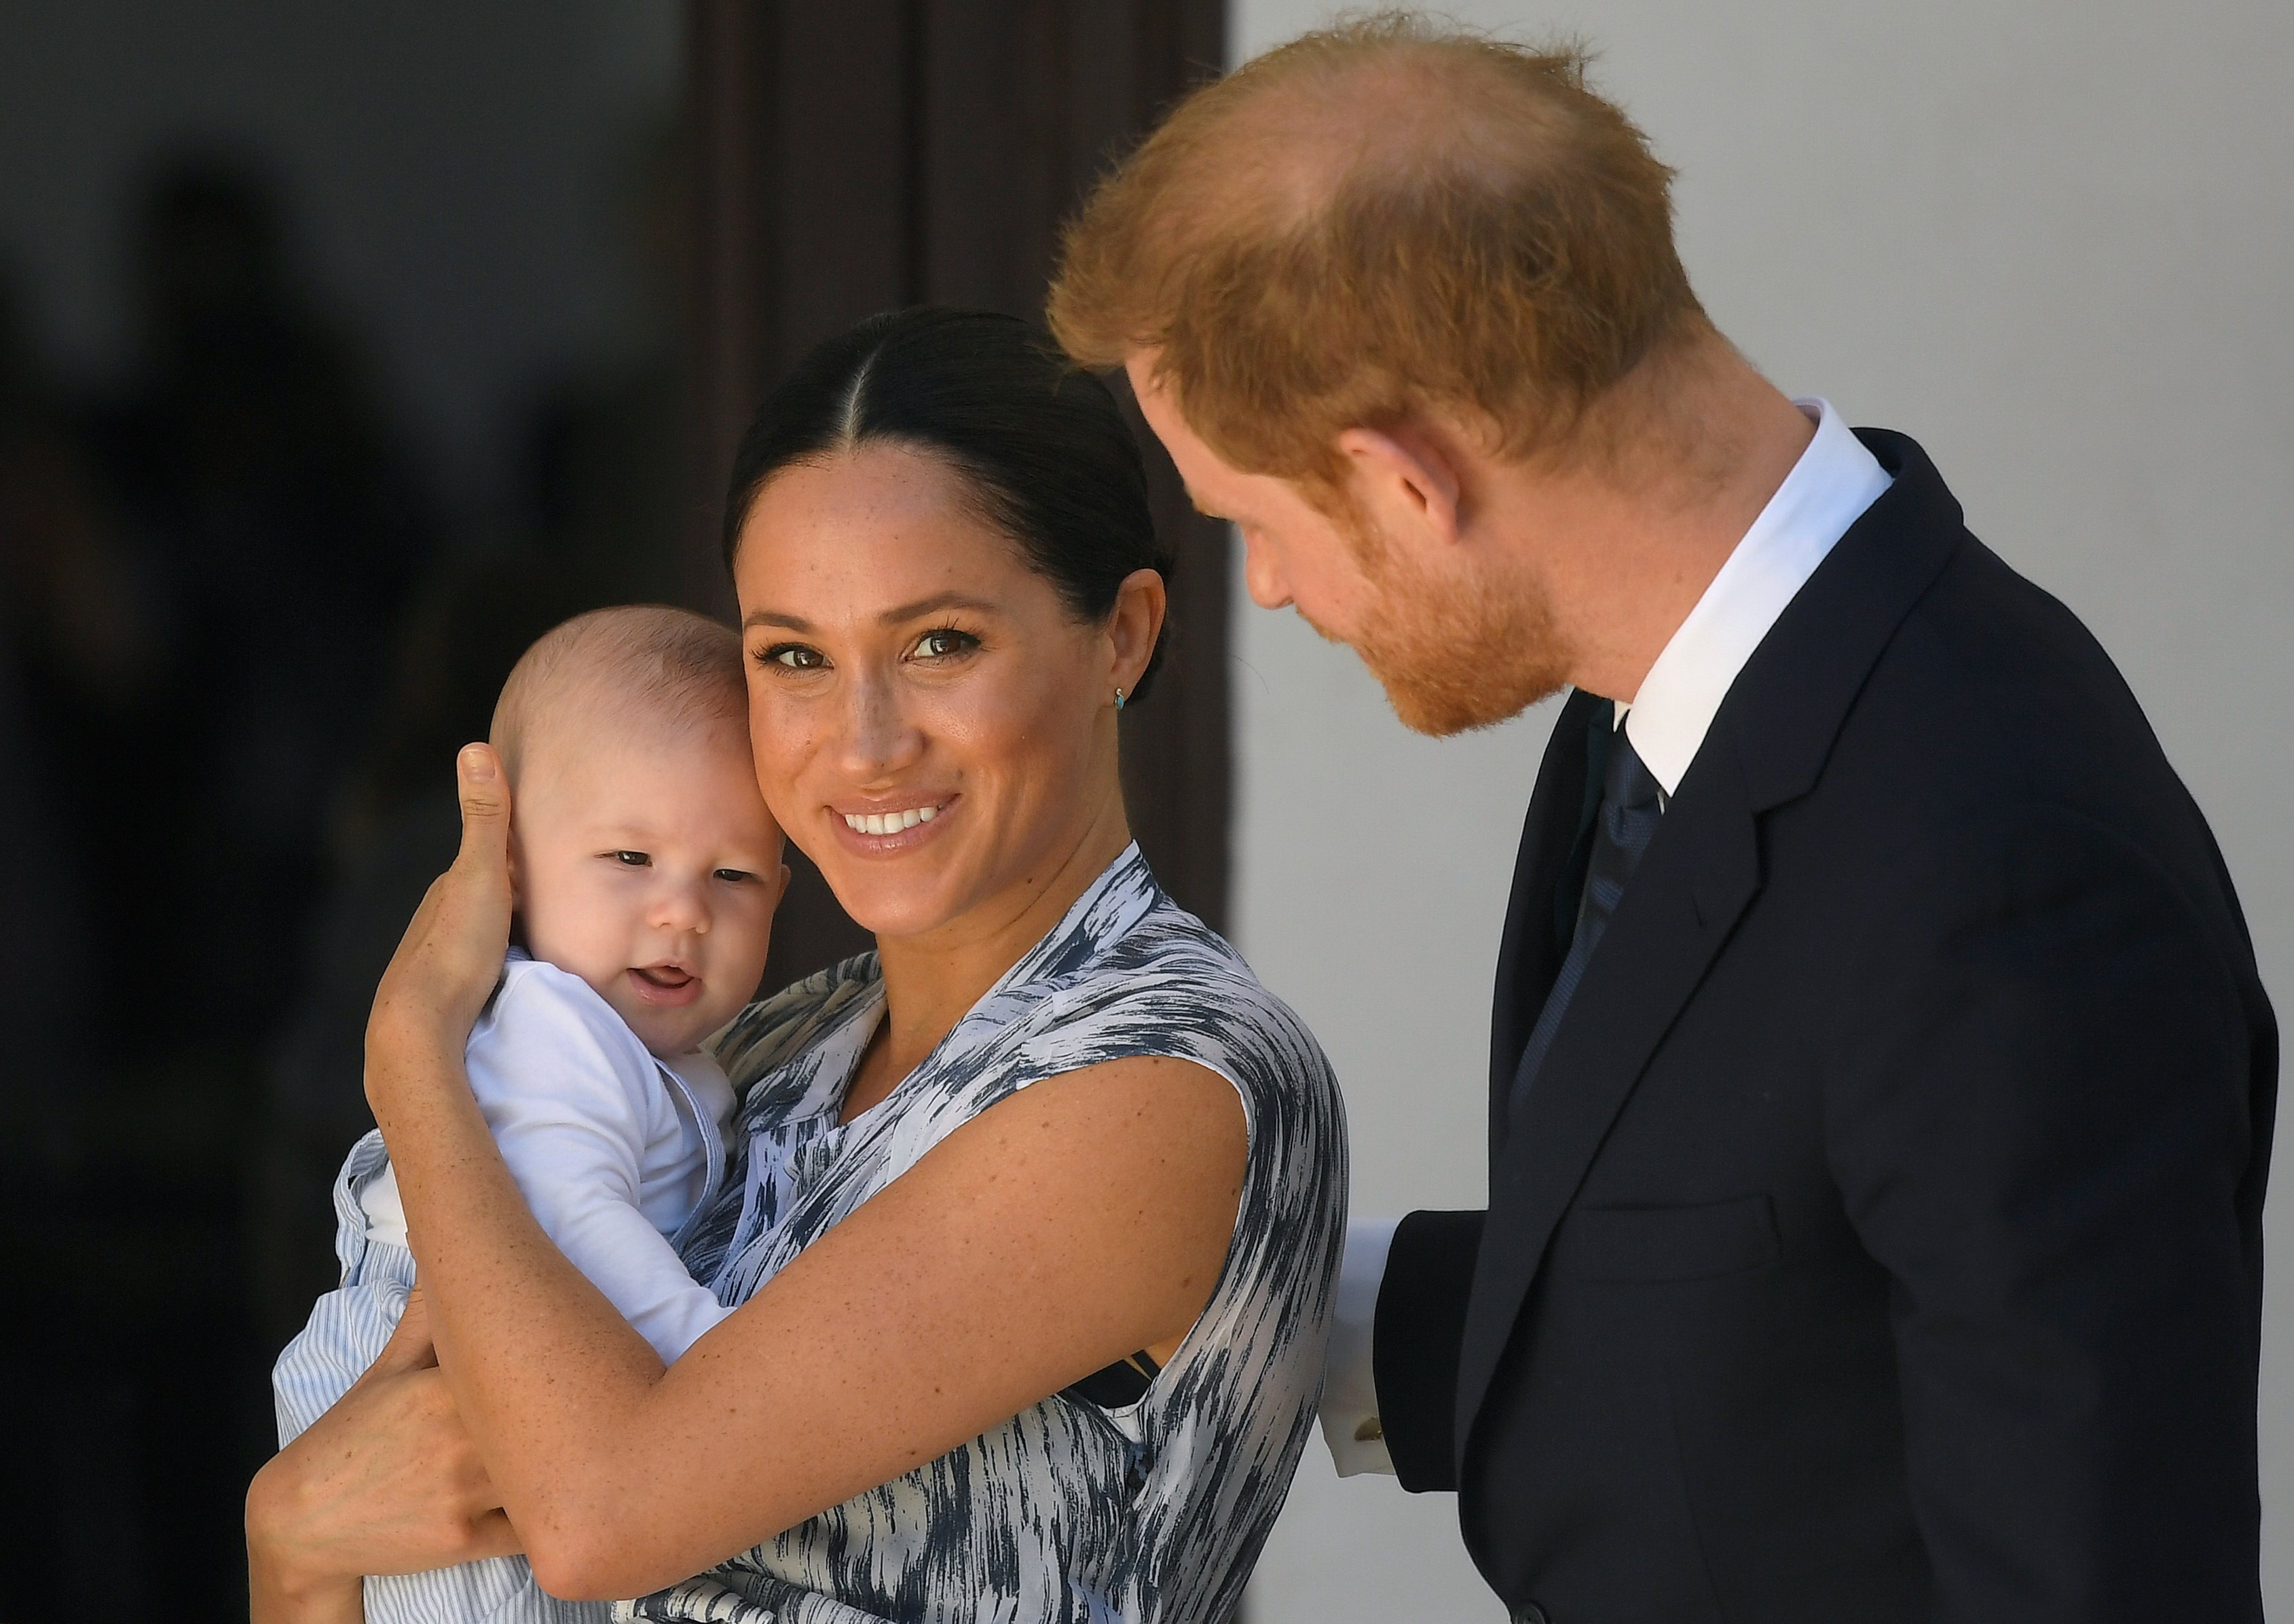 Prince Harry and his wife Meghan Markle photographed with their son Archie Mountbatten-Windsor at the Desmond & Leah Tutu Legacy Foundation during their royal tour of South Africa on September 25, 2019 in Cape Town, South Africa | Source: Getty Images